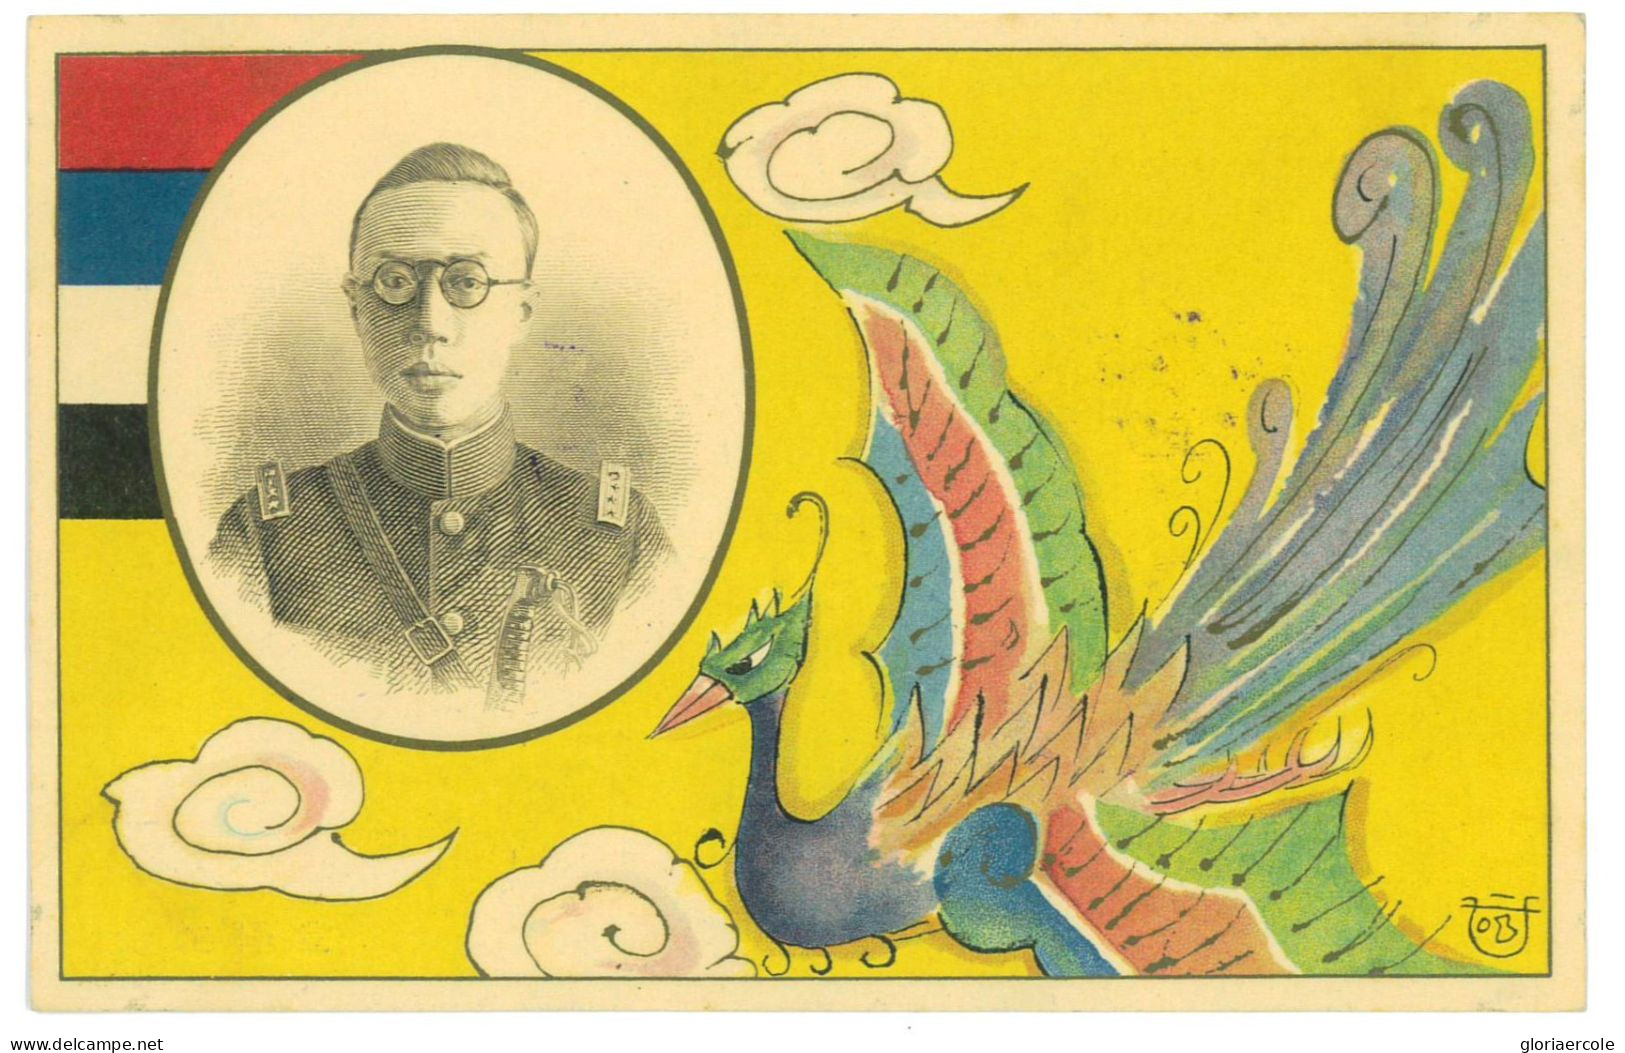 P2791 - CHINA/MANCHURIA MICHEL 23/26 WITH SPECIAL FDC CANCELLATION ON SPECIAL (BEAUTIFUL!!) POST CARD - 1932-45  Mandschurei (Mandschukuo)